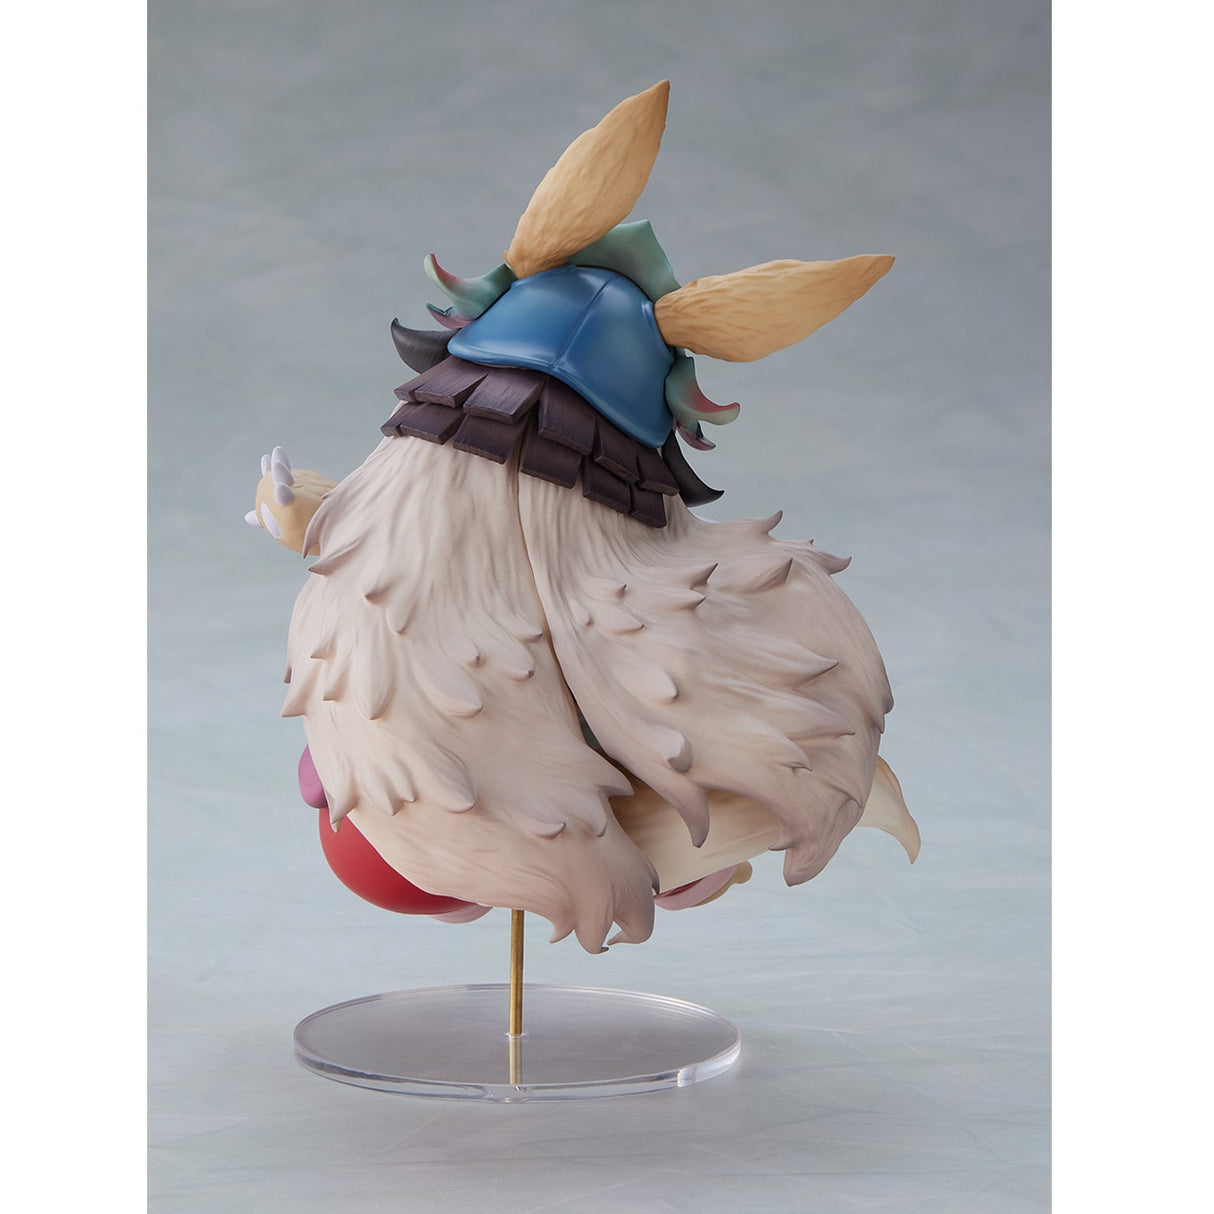 Behold the Nanachi figurine, featured in their iconic pose with wide eyes and beloved bunny ears. If you are looking for more Made In Abyss Merch, We have it all! | Check out all our Anime Merch now!